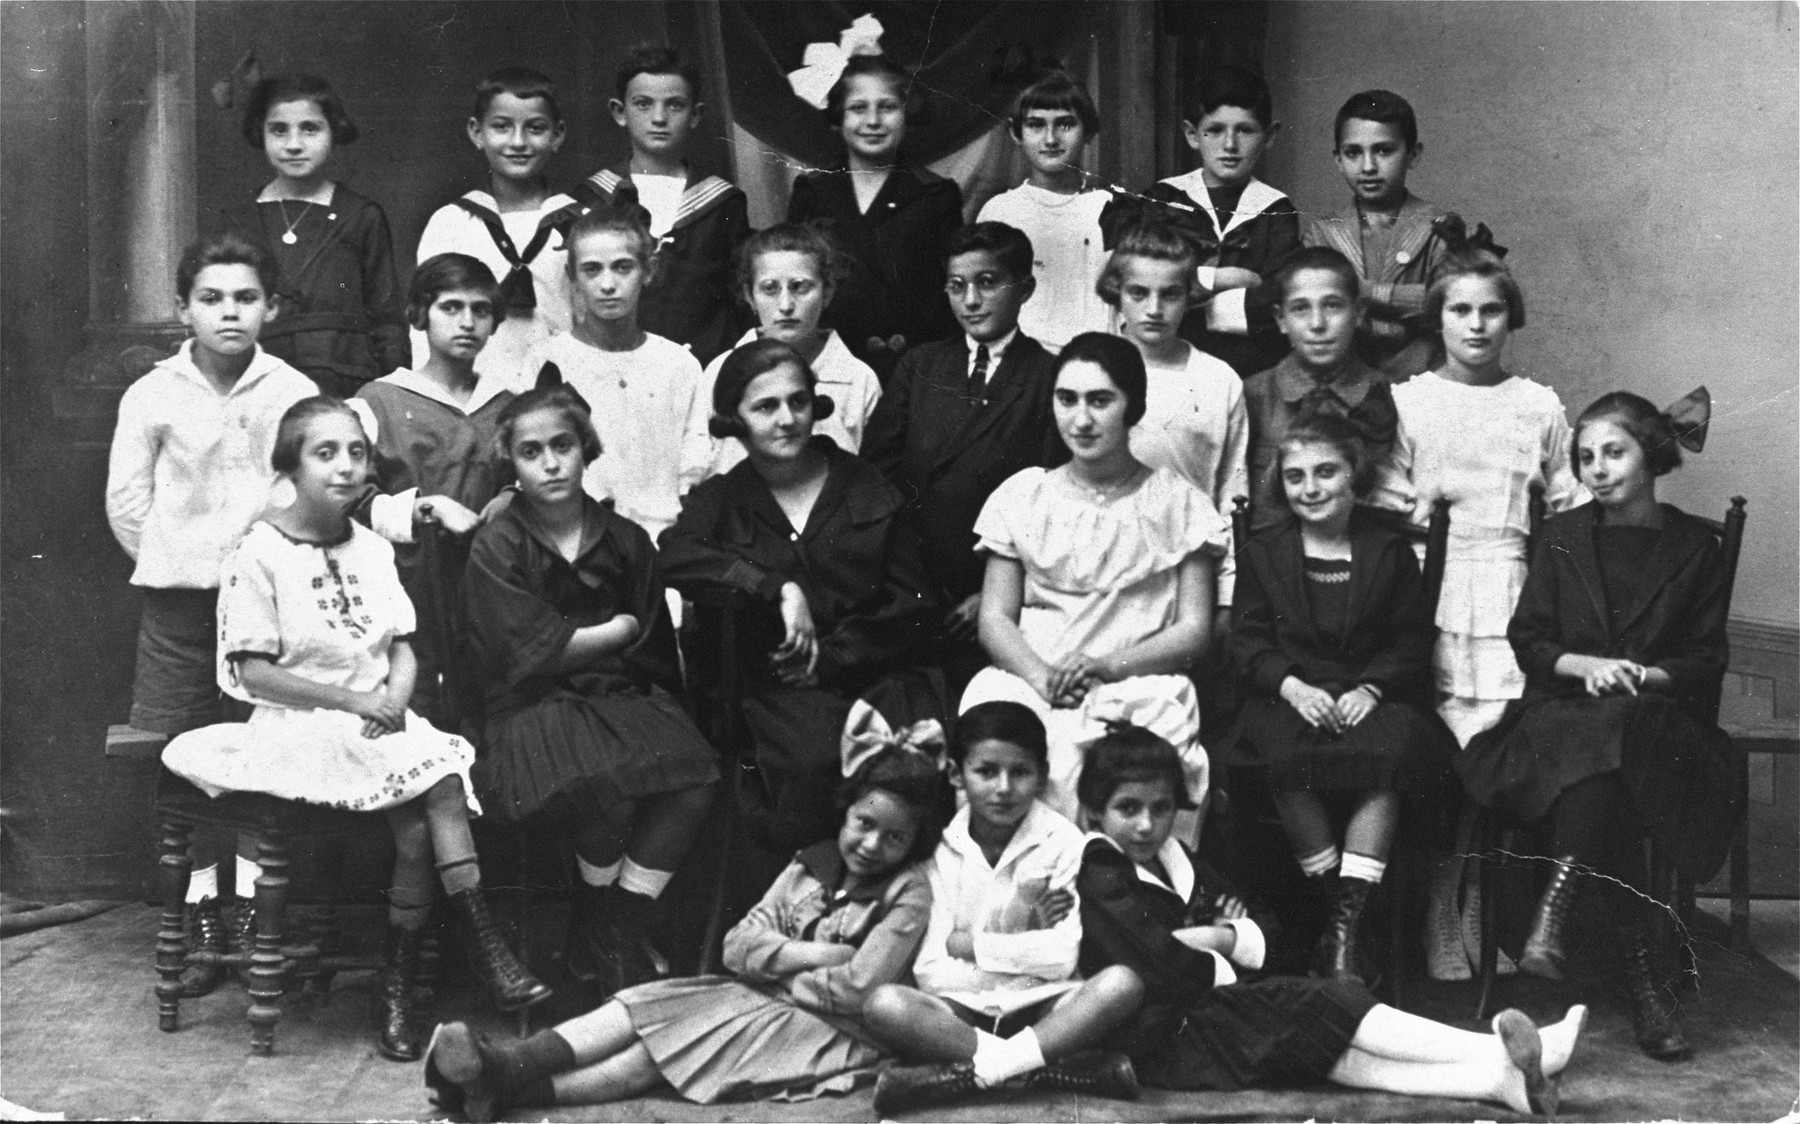 Group portrait of the members of a Zionist youth group in Pozega, Croatia.

Among those pictured is Bruno Klein (top row, second from the left), the uncle of the donor.